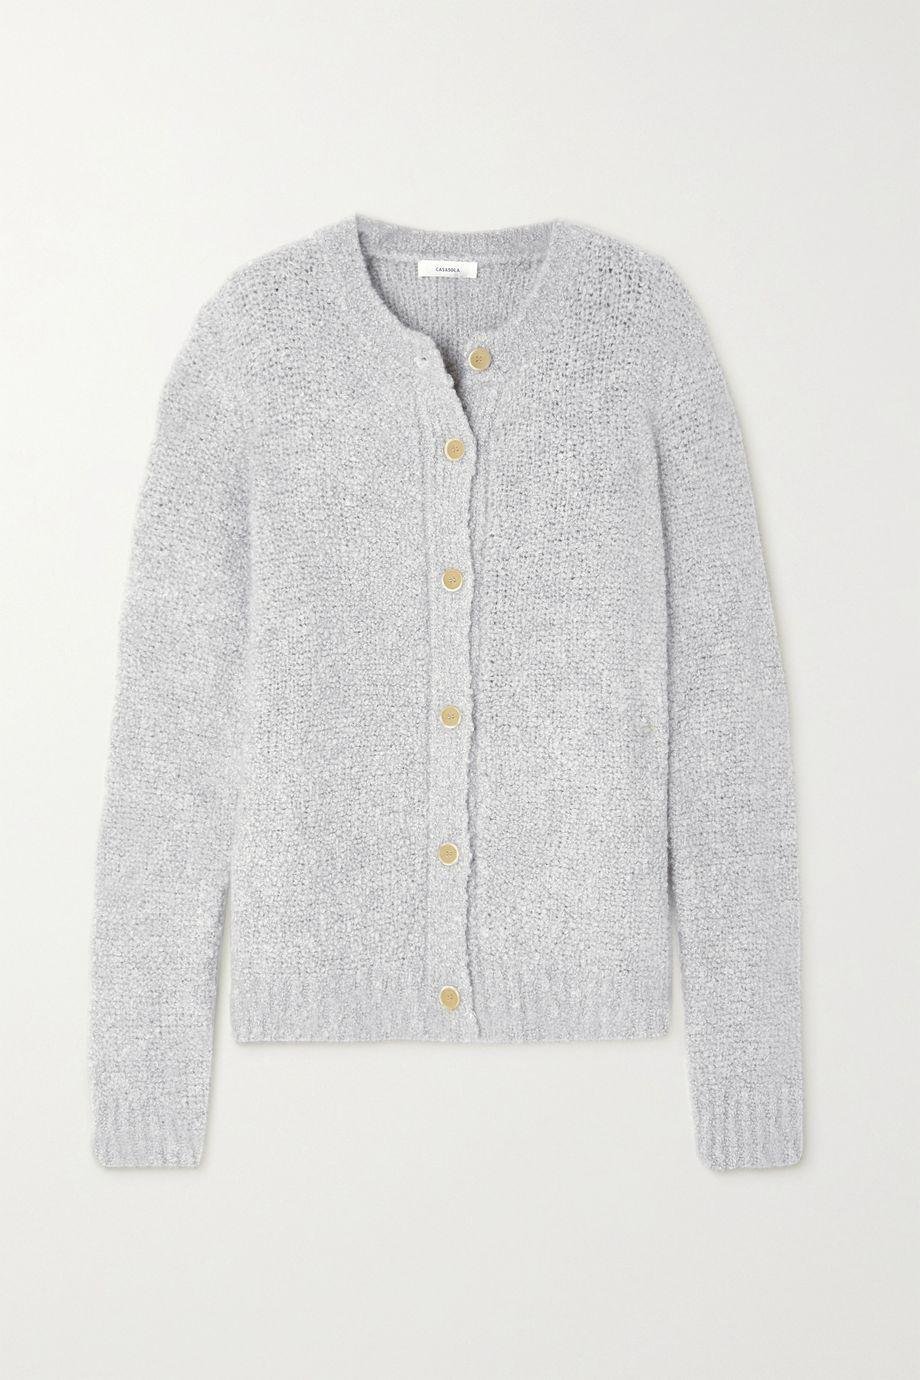 NET SUSTAIN Francis recycled cashmere-blend bouclé cardigan by CASASOLA